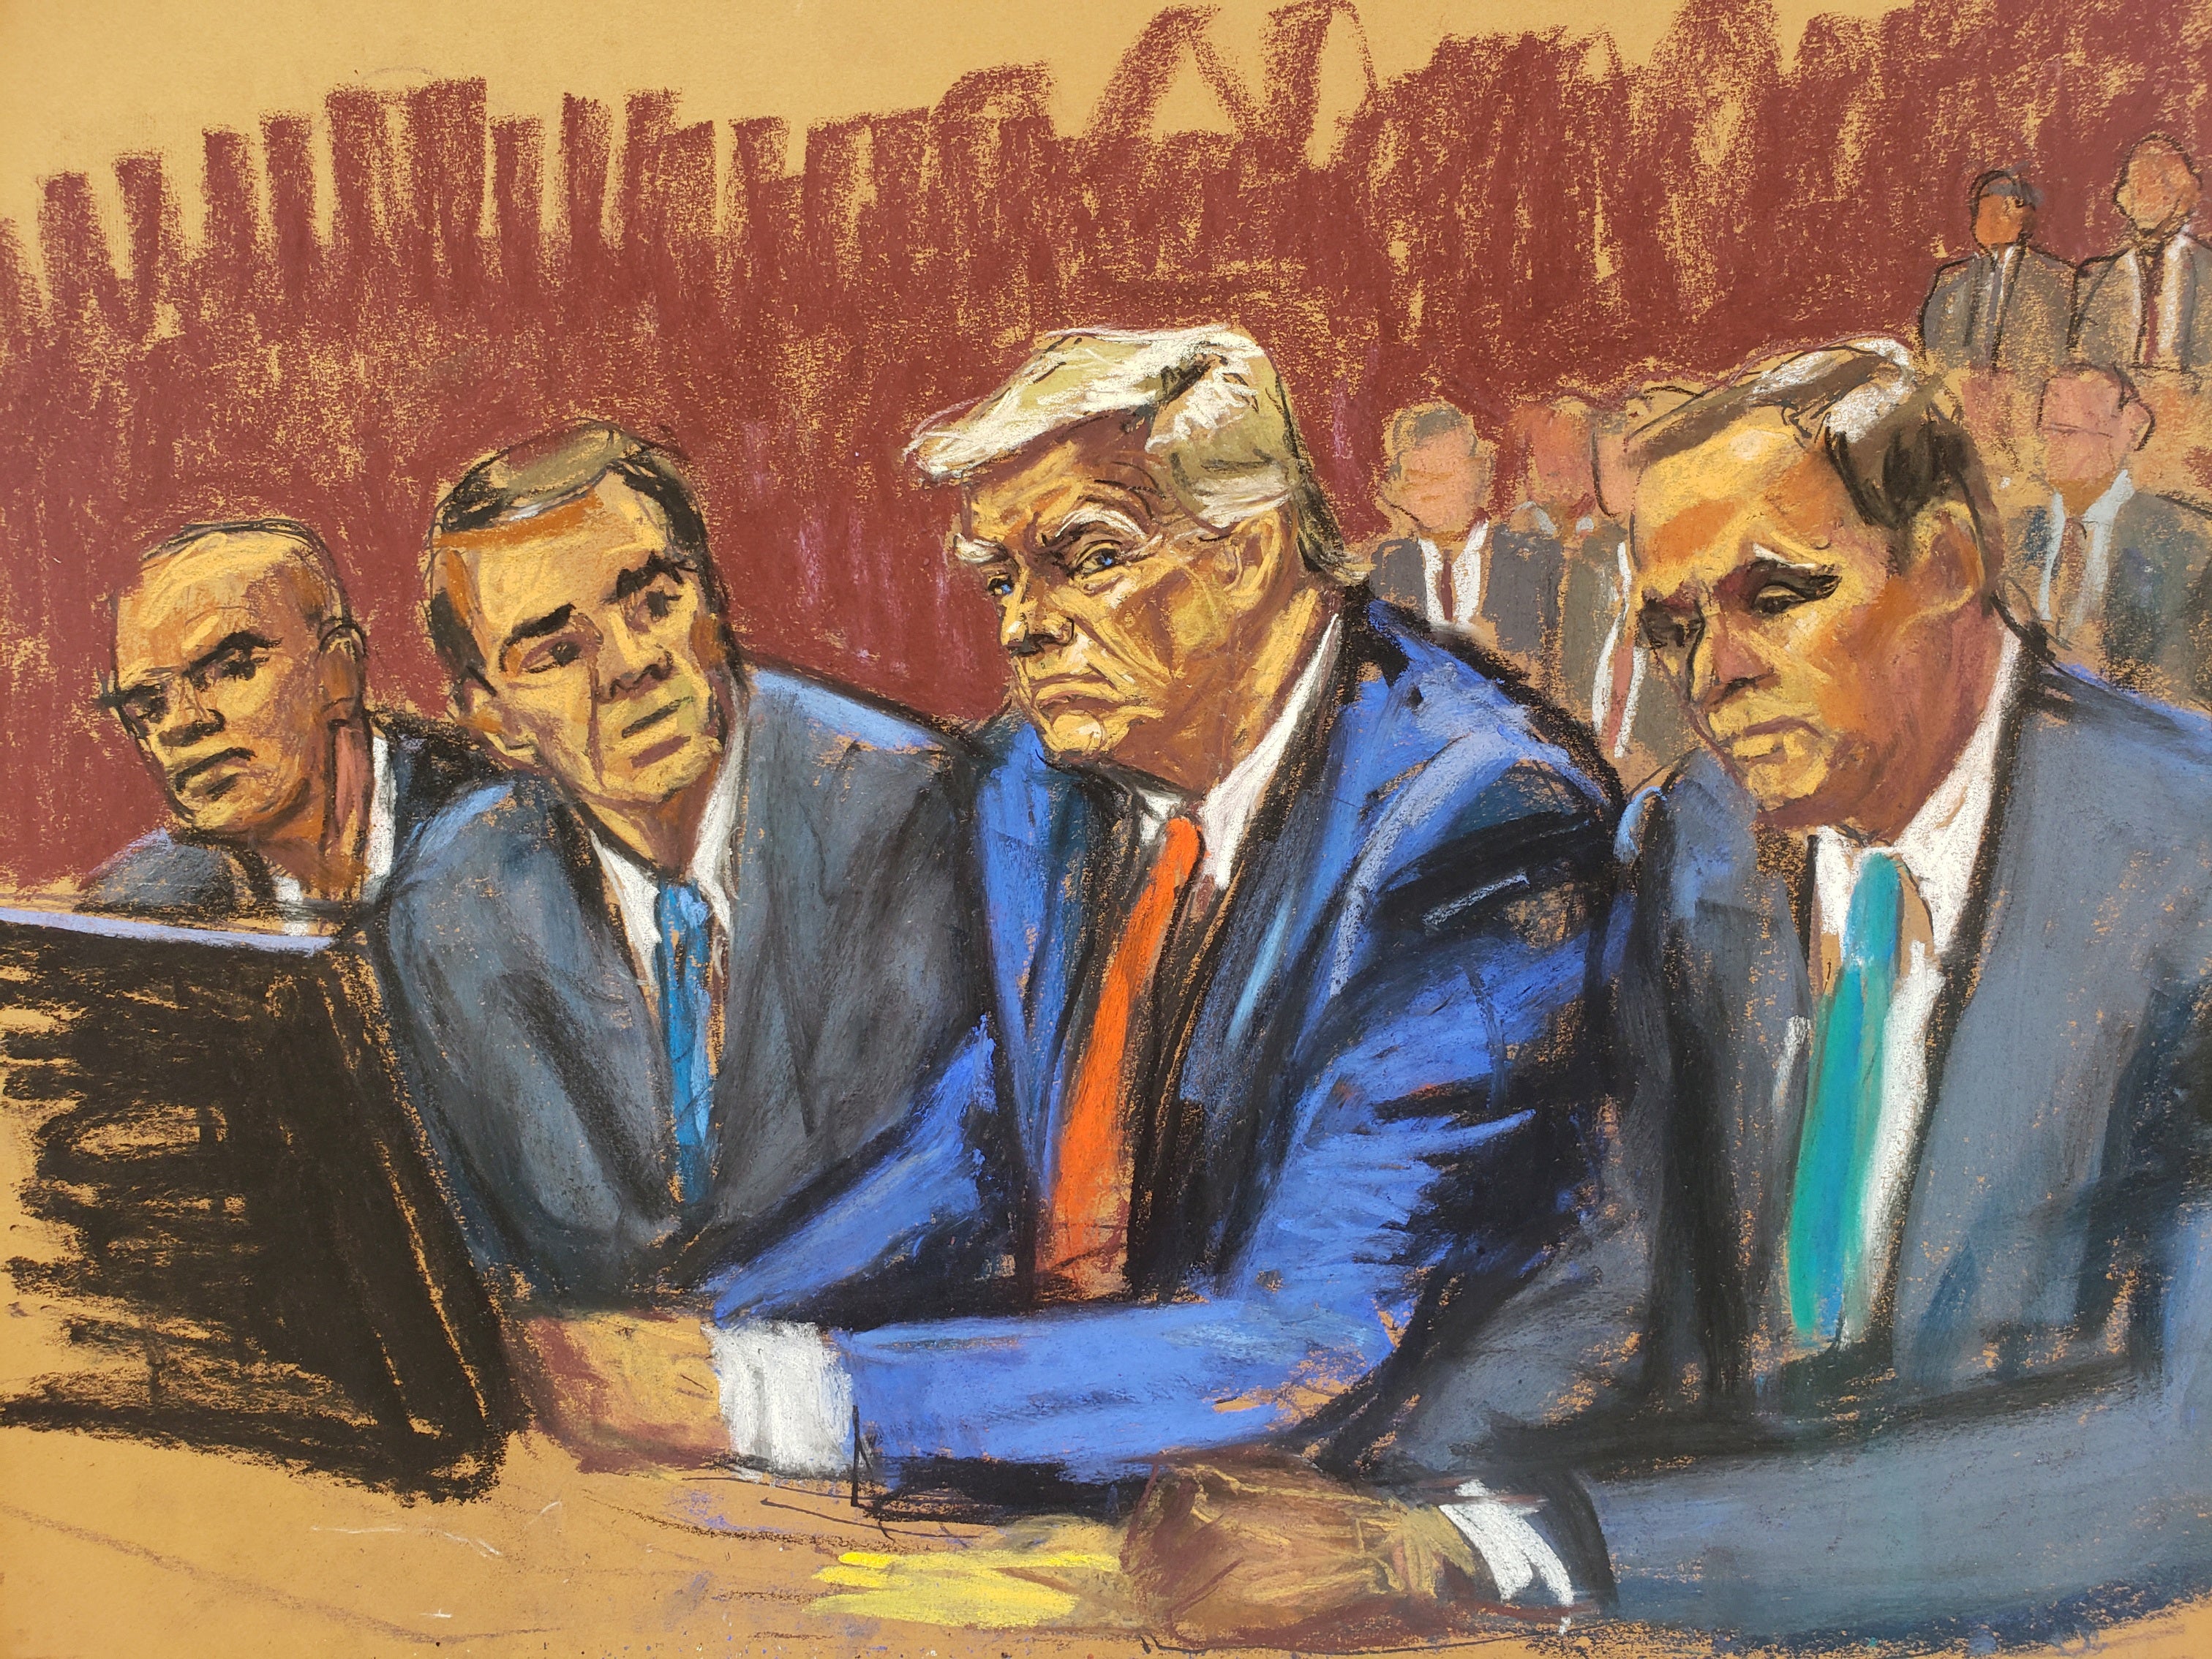 Donald Trump appears alongside his aide and co-defendant Walt Nauta and attorneys Chris Kise and Todd Blanche in Miami, Florida, in June 2023